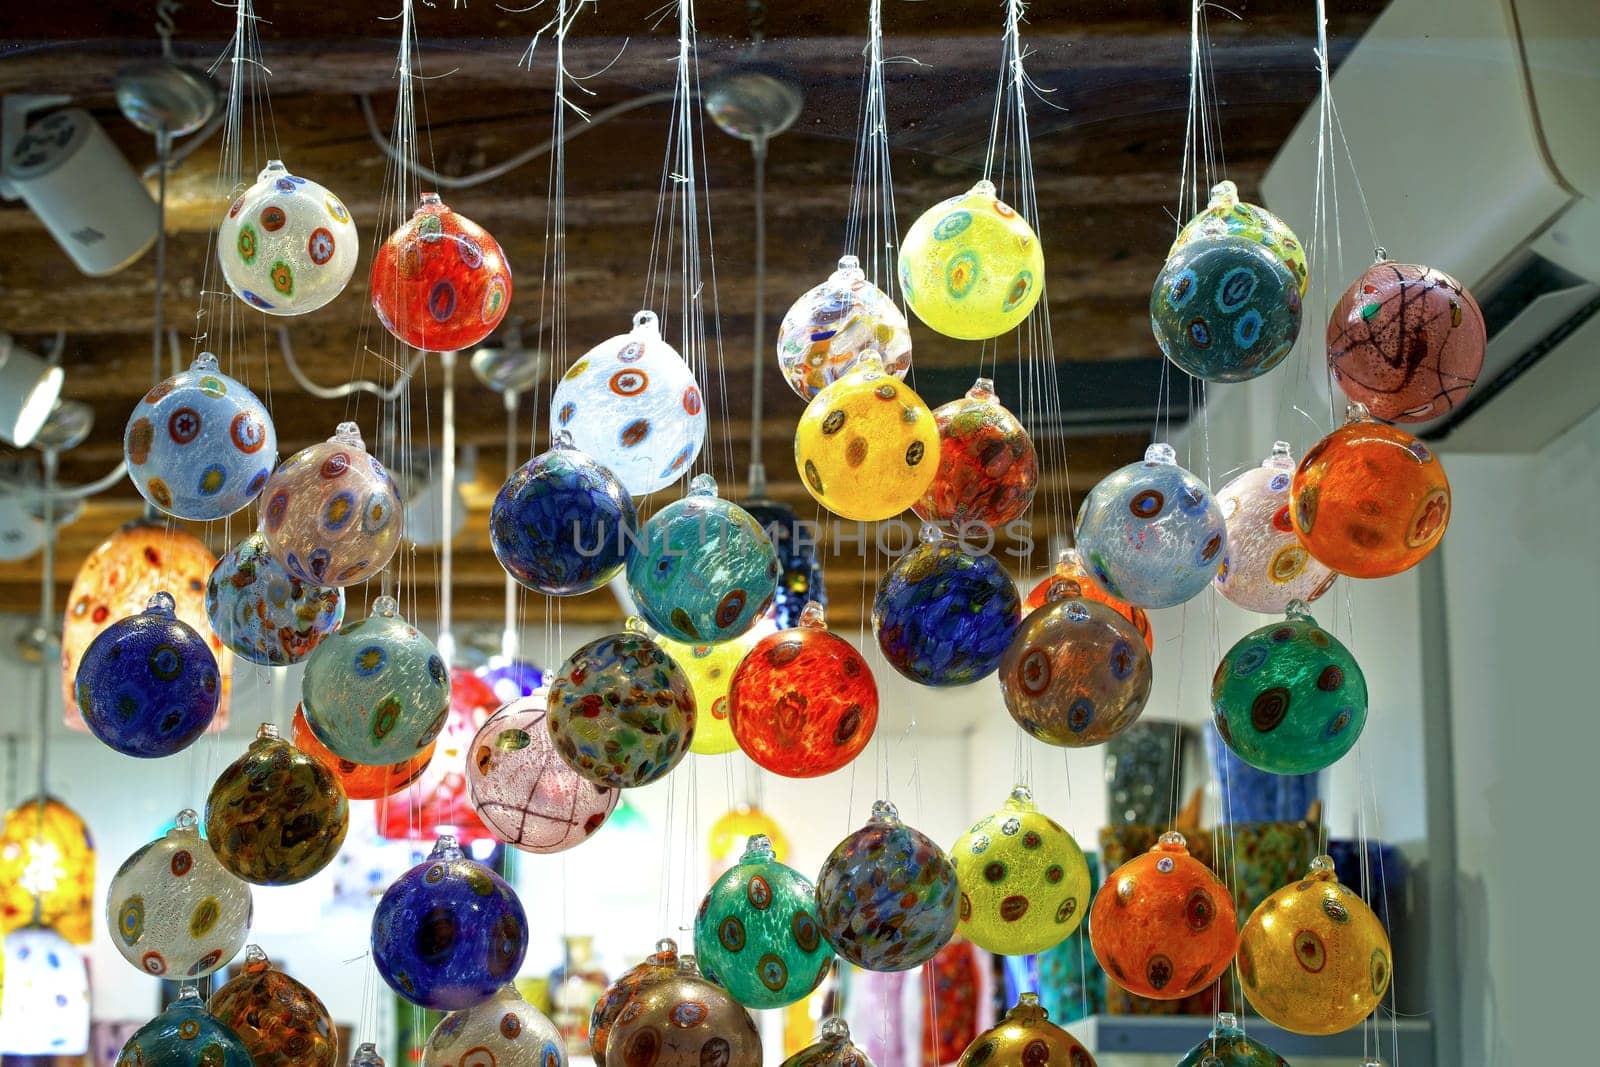 Colored glass objects in a shop window of Venice